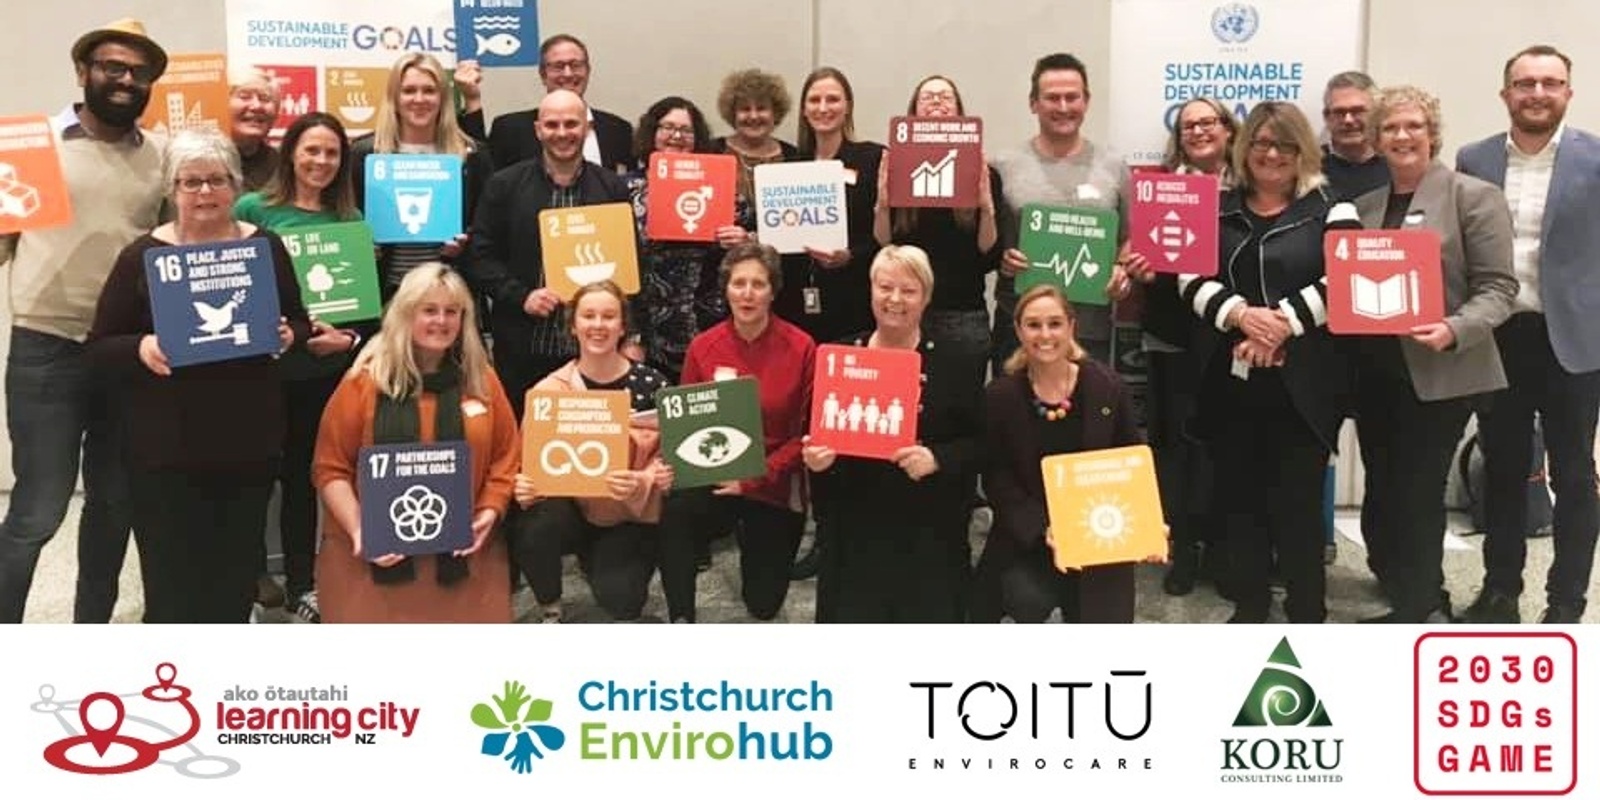 Banner image for 2030 Sustainable Development Goals Game - Christchurch